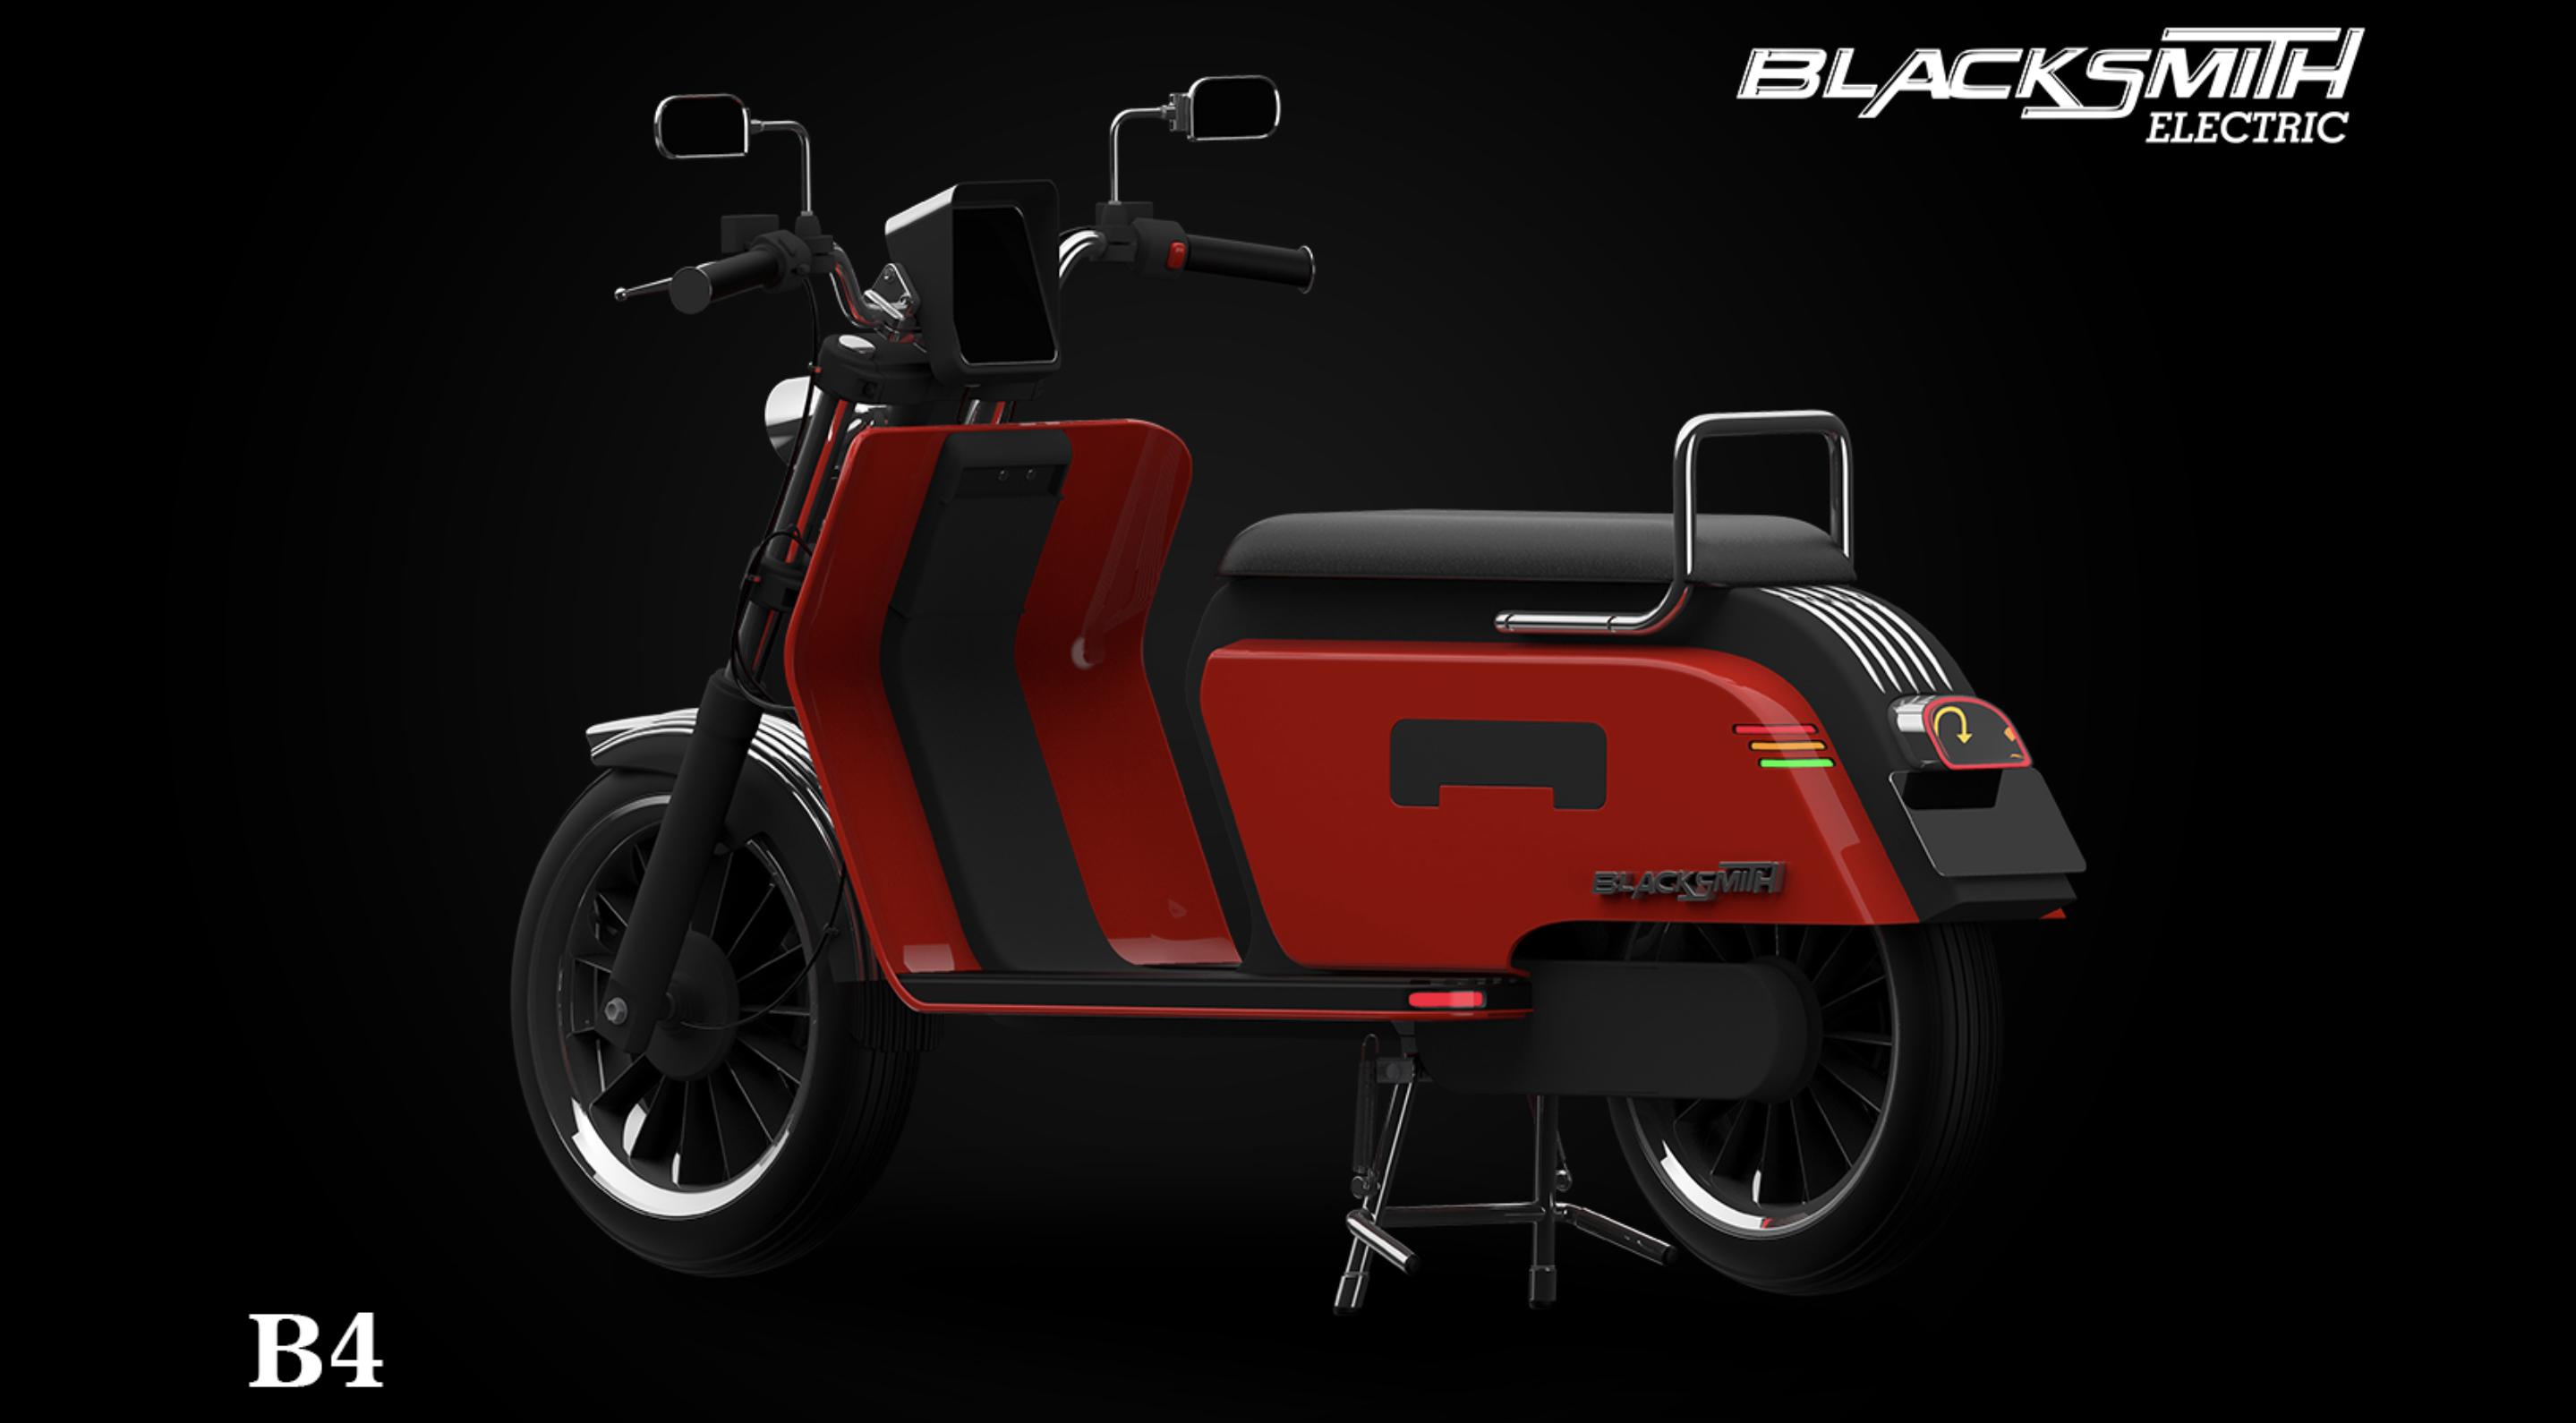 Blacksmith Electric unveils new 75 MPH Vespastyle electric scooter